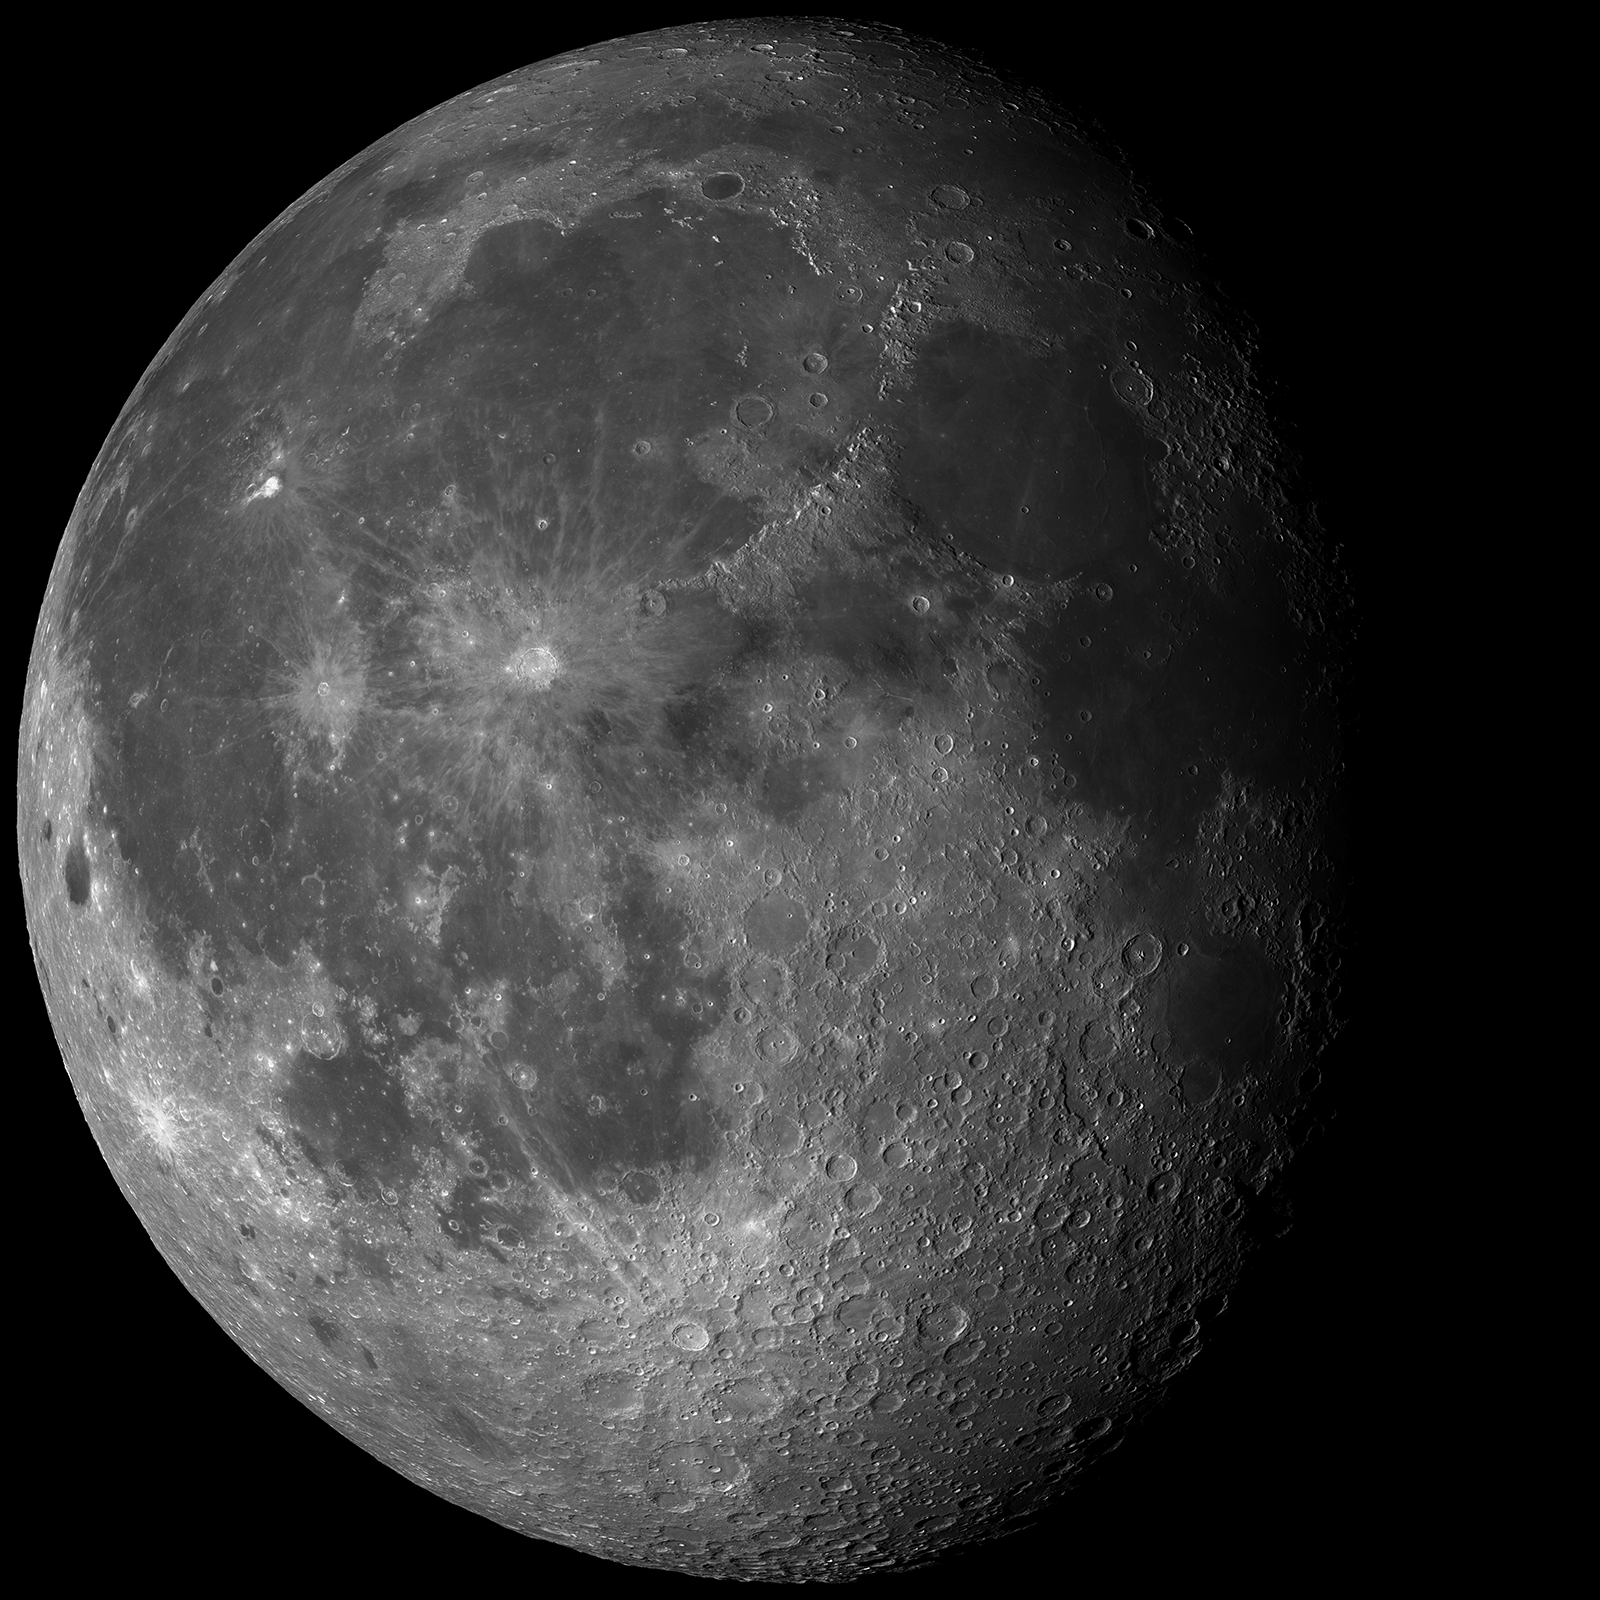 This Rotating Moon Mosaic Is The Most Accurate You’ve Ever Seen